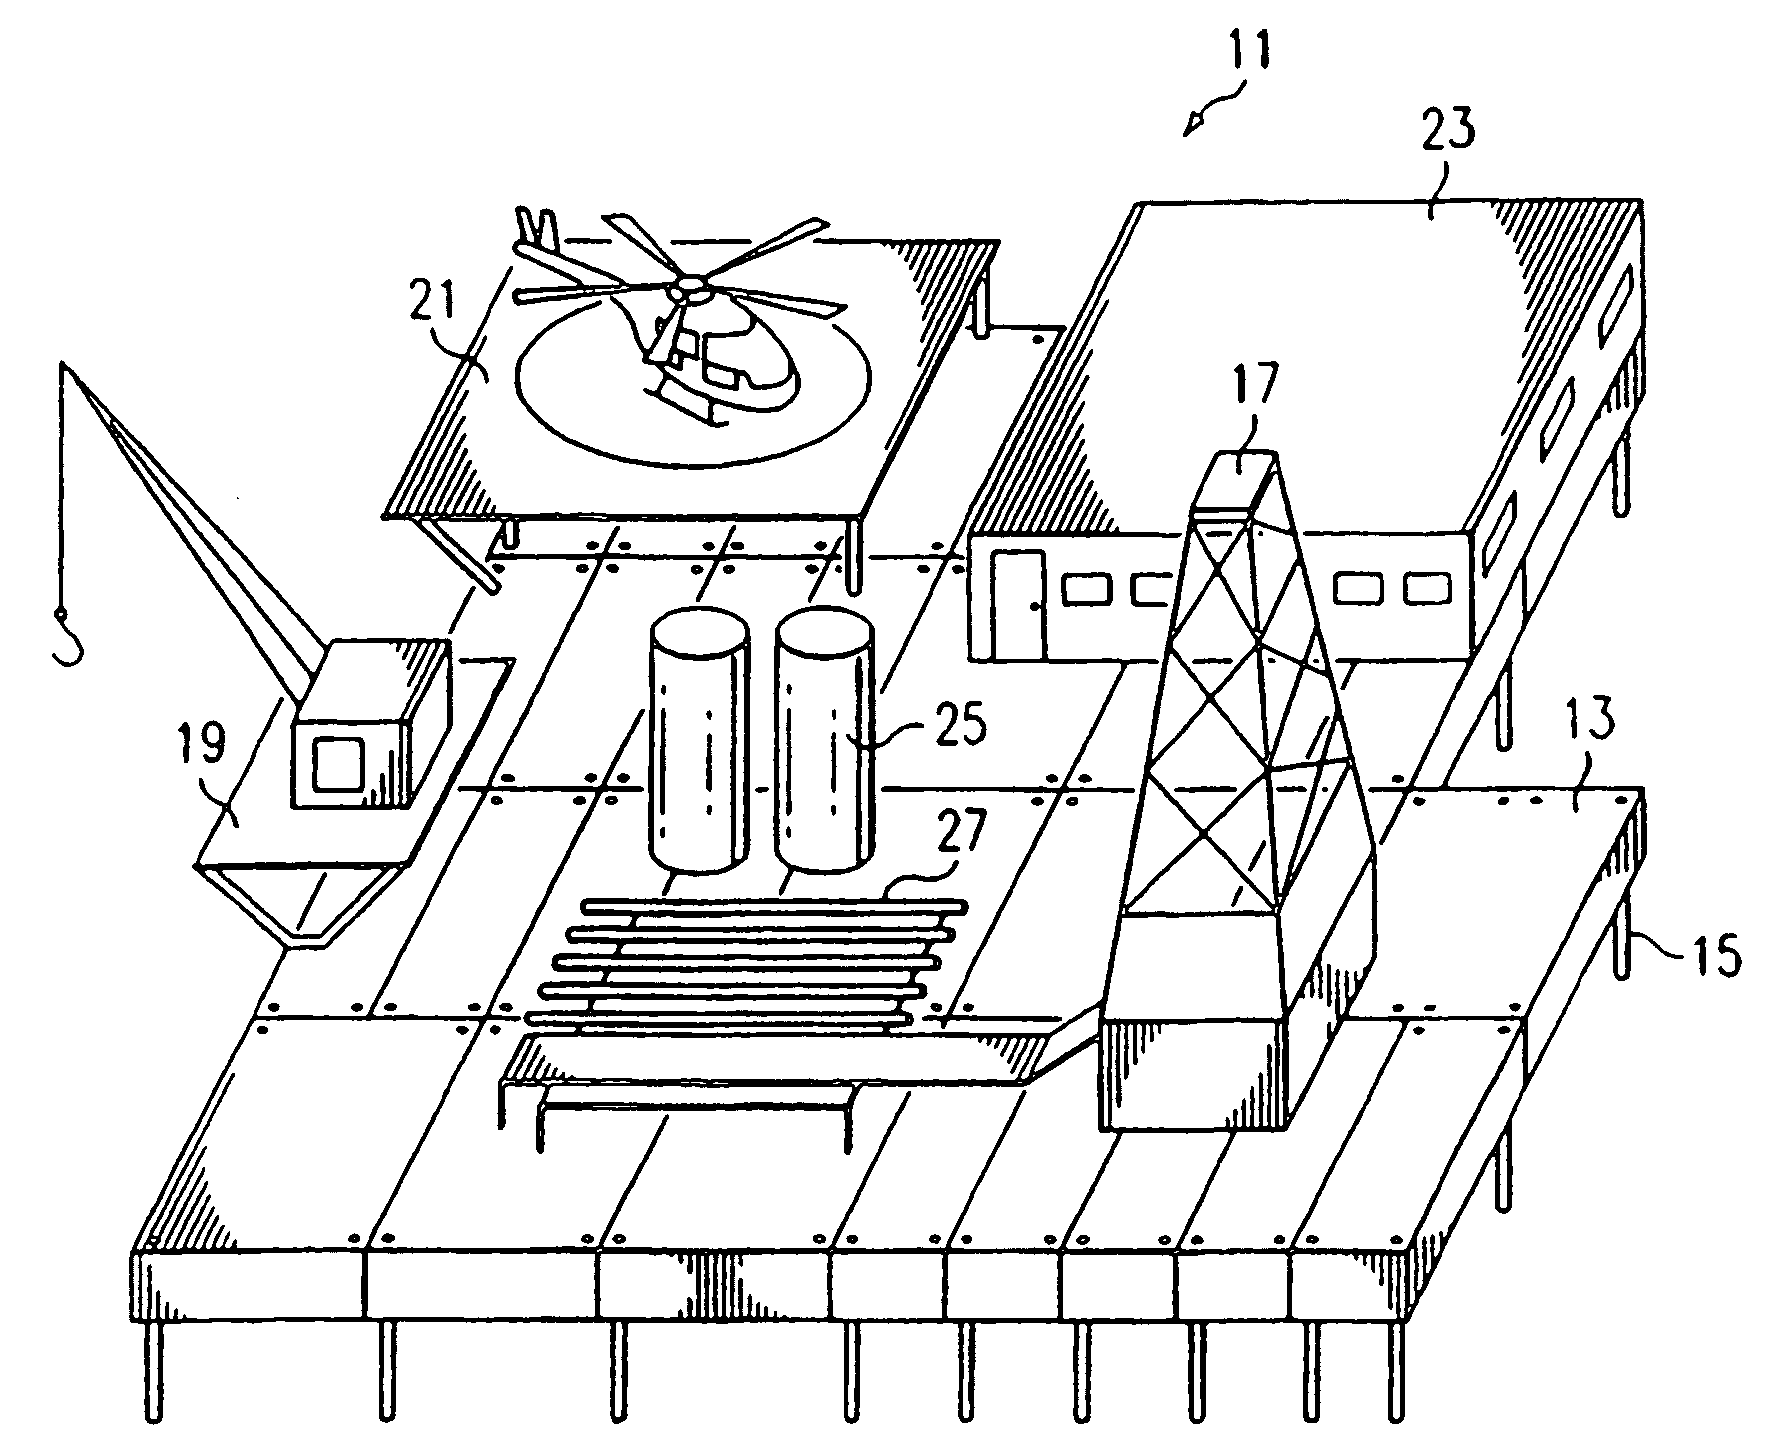 Method and system for building modular structures from which oil and gas wells are drilled